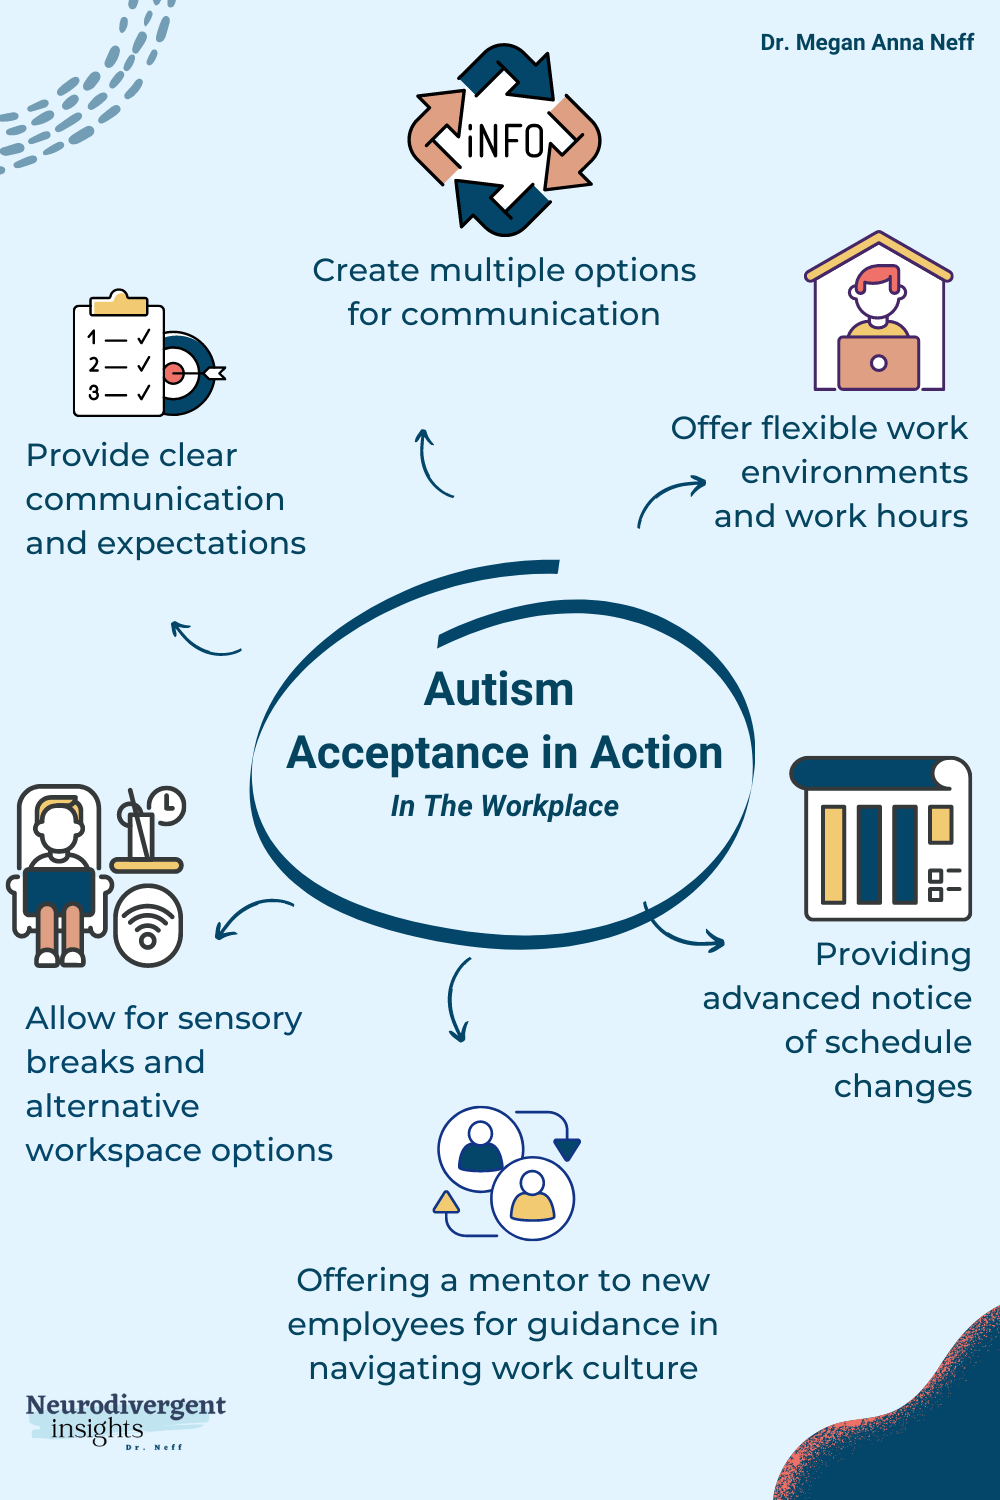 Autism acceptance and autism awareness in the workplace